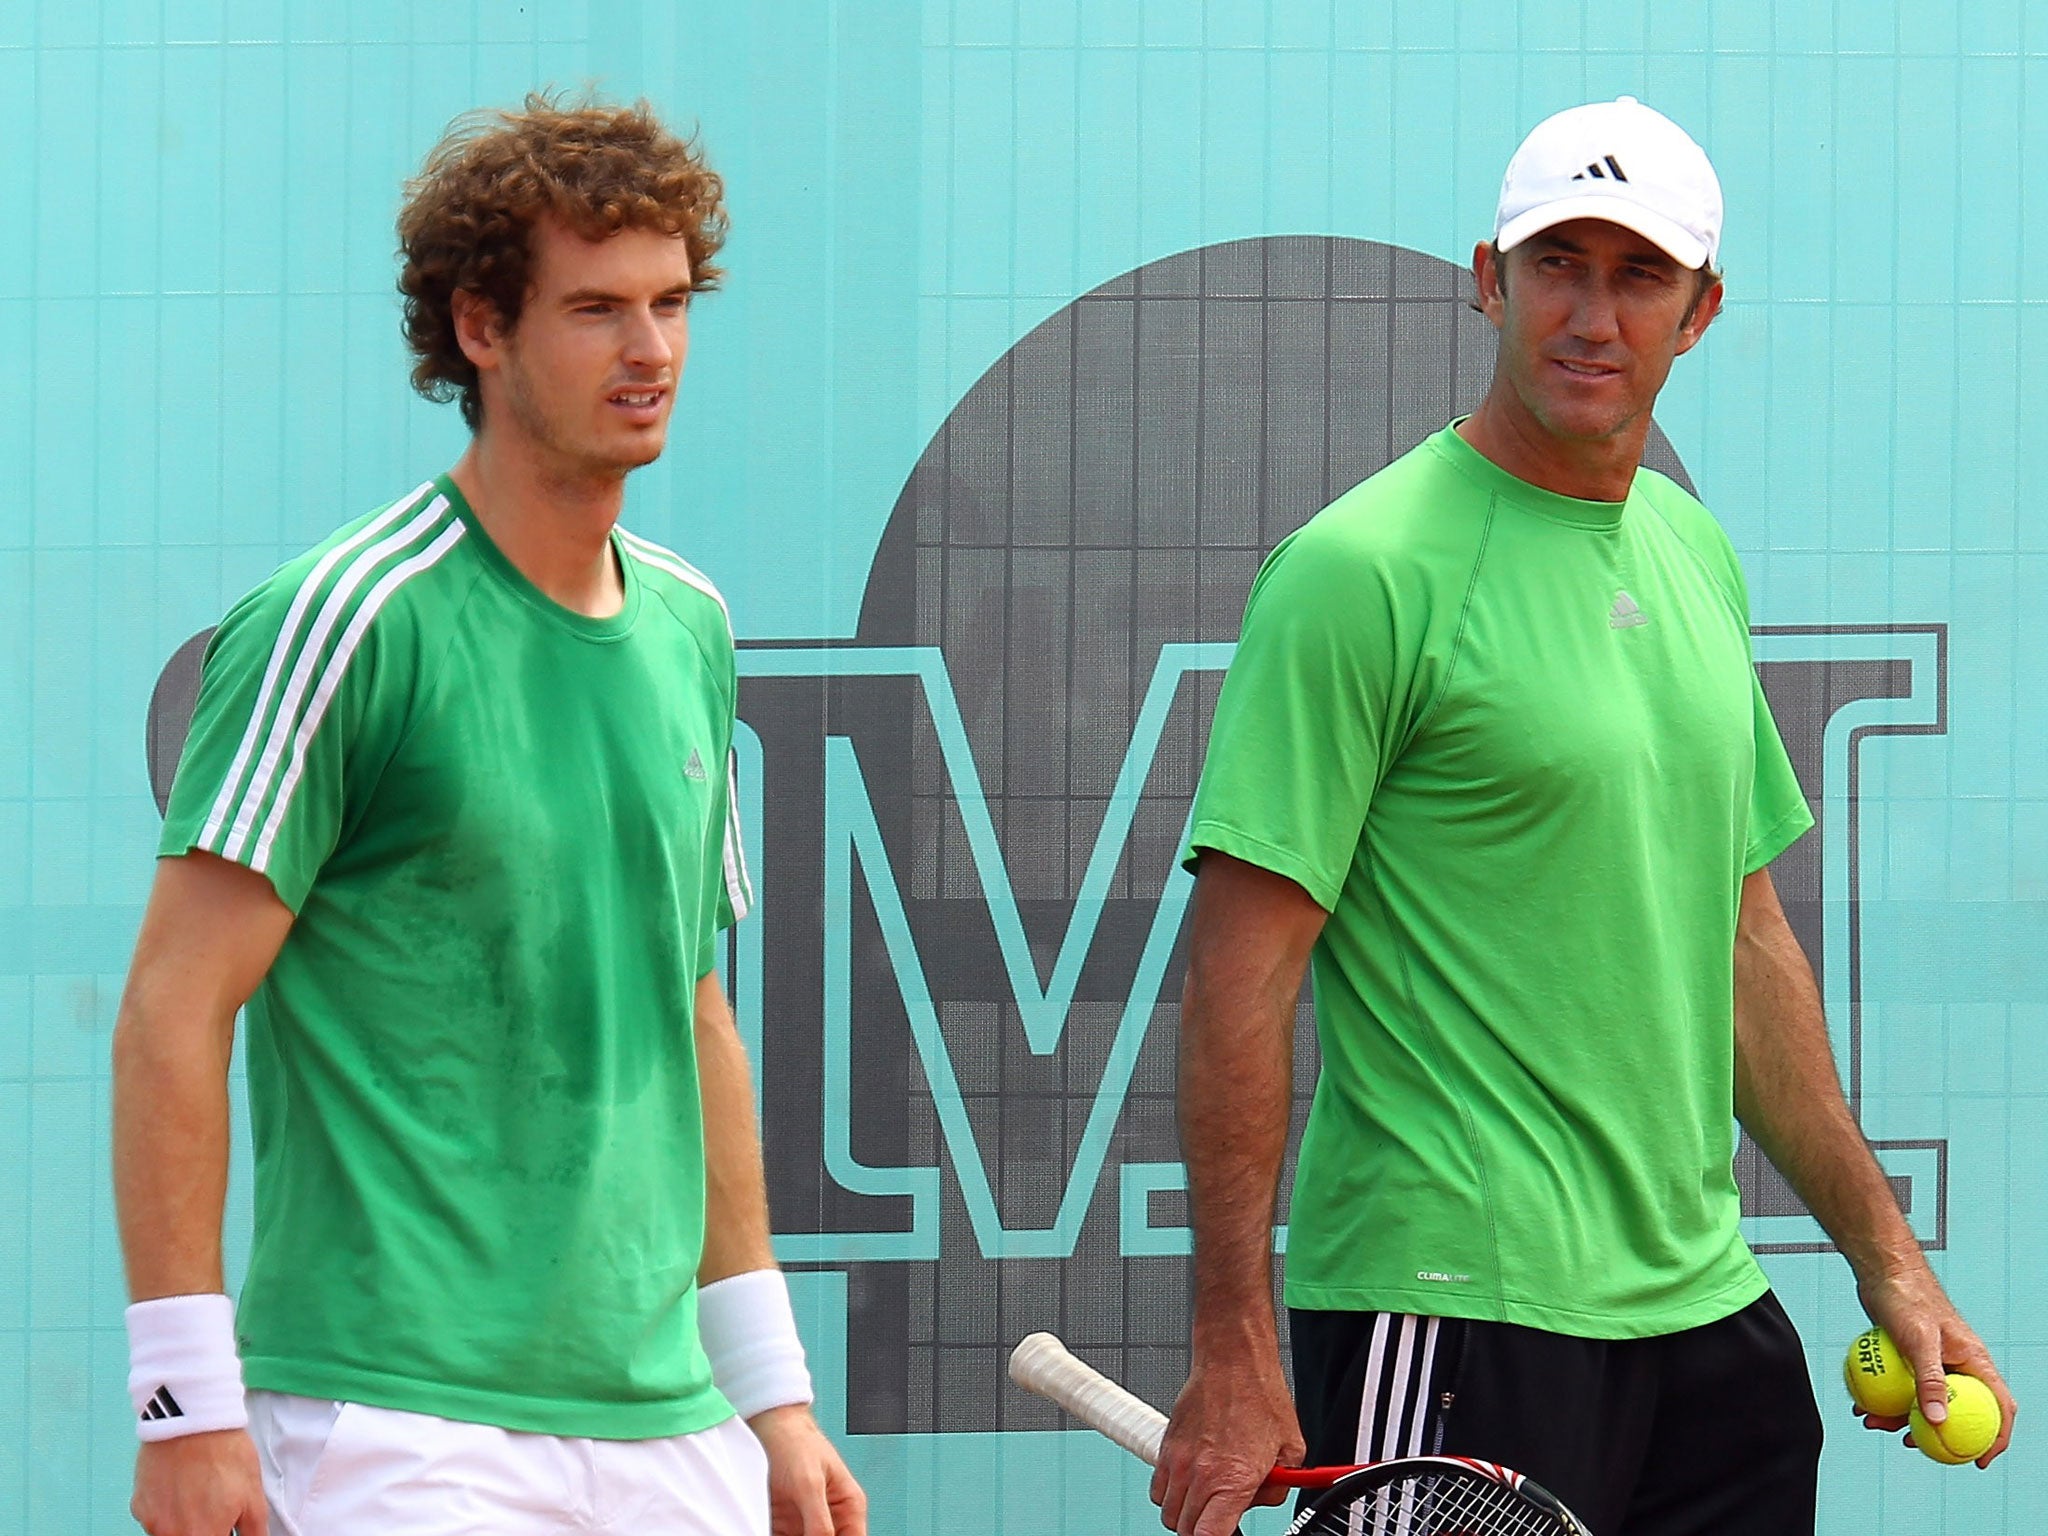 Darren Cahill (right) introduced Andy Murray to Ivan Lendl